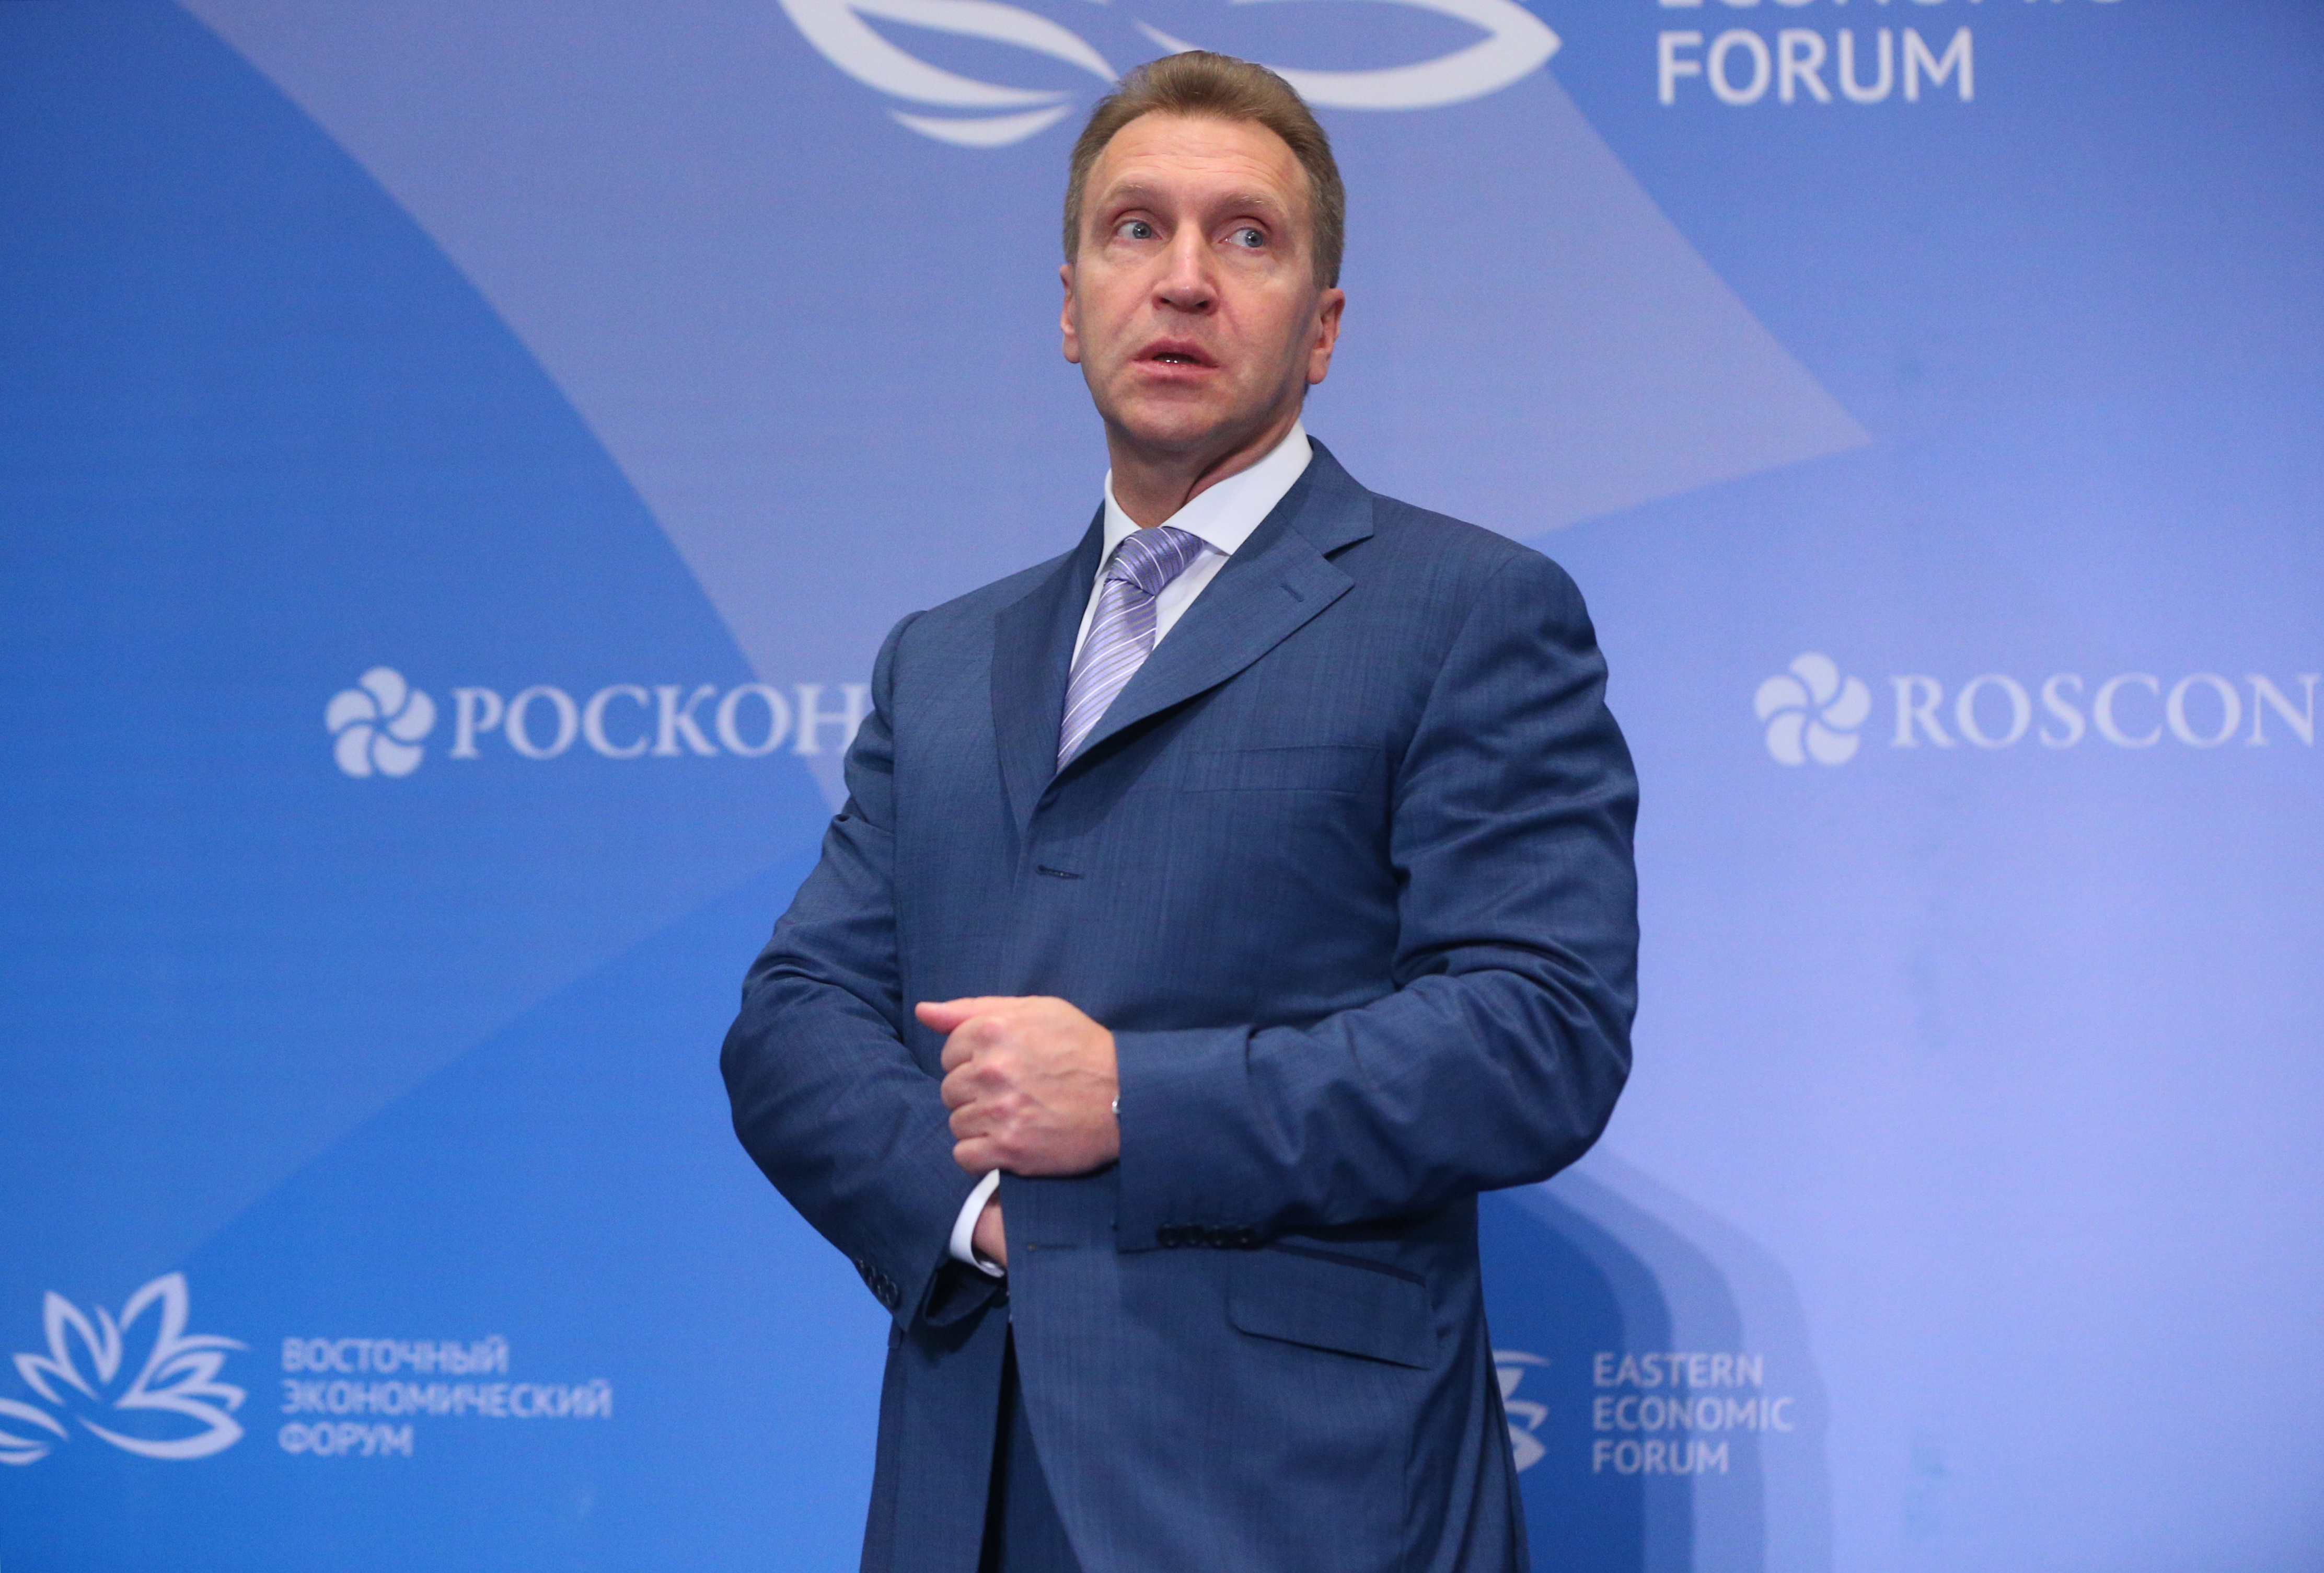 Russian Vice Premier Igor Shuvalov says the Russia-China economic cooperation dynamic is good.